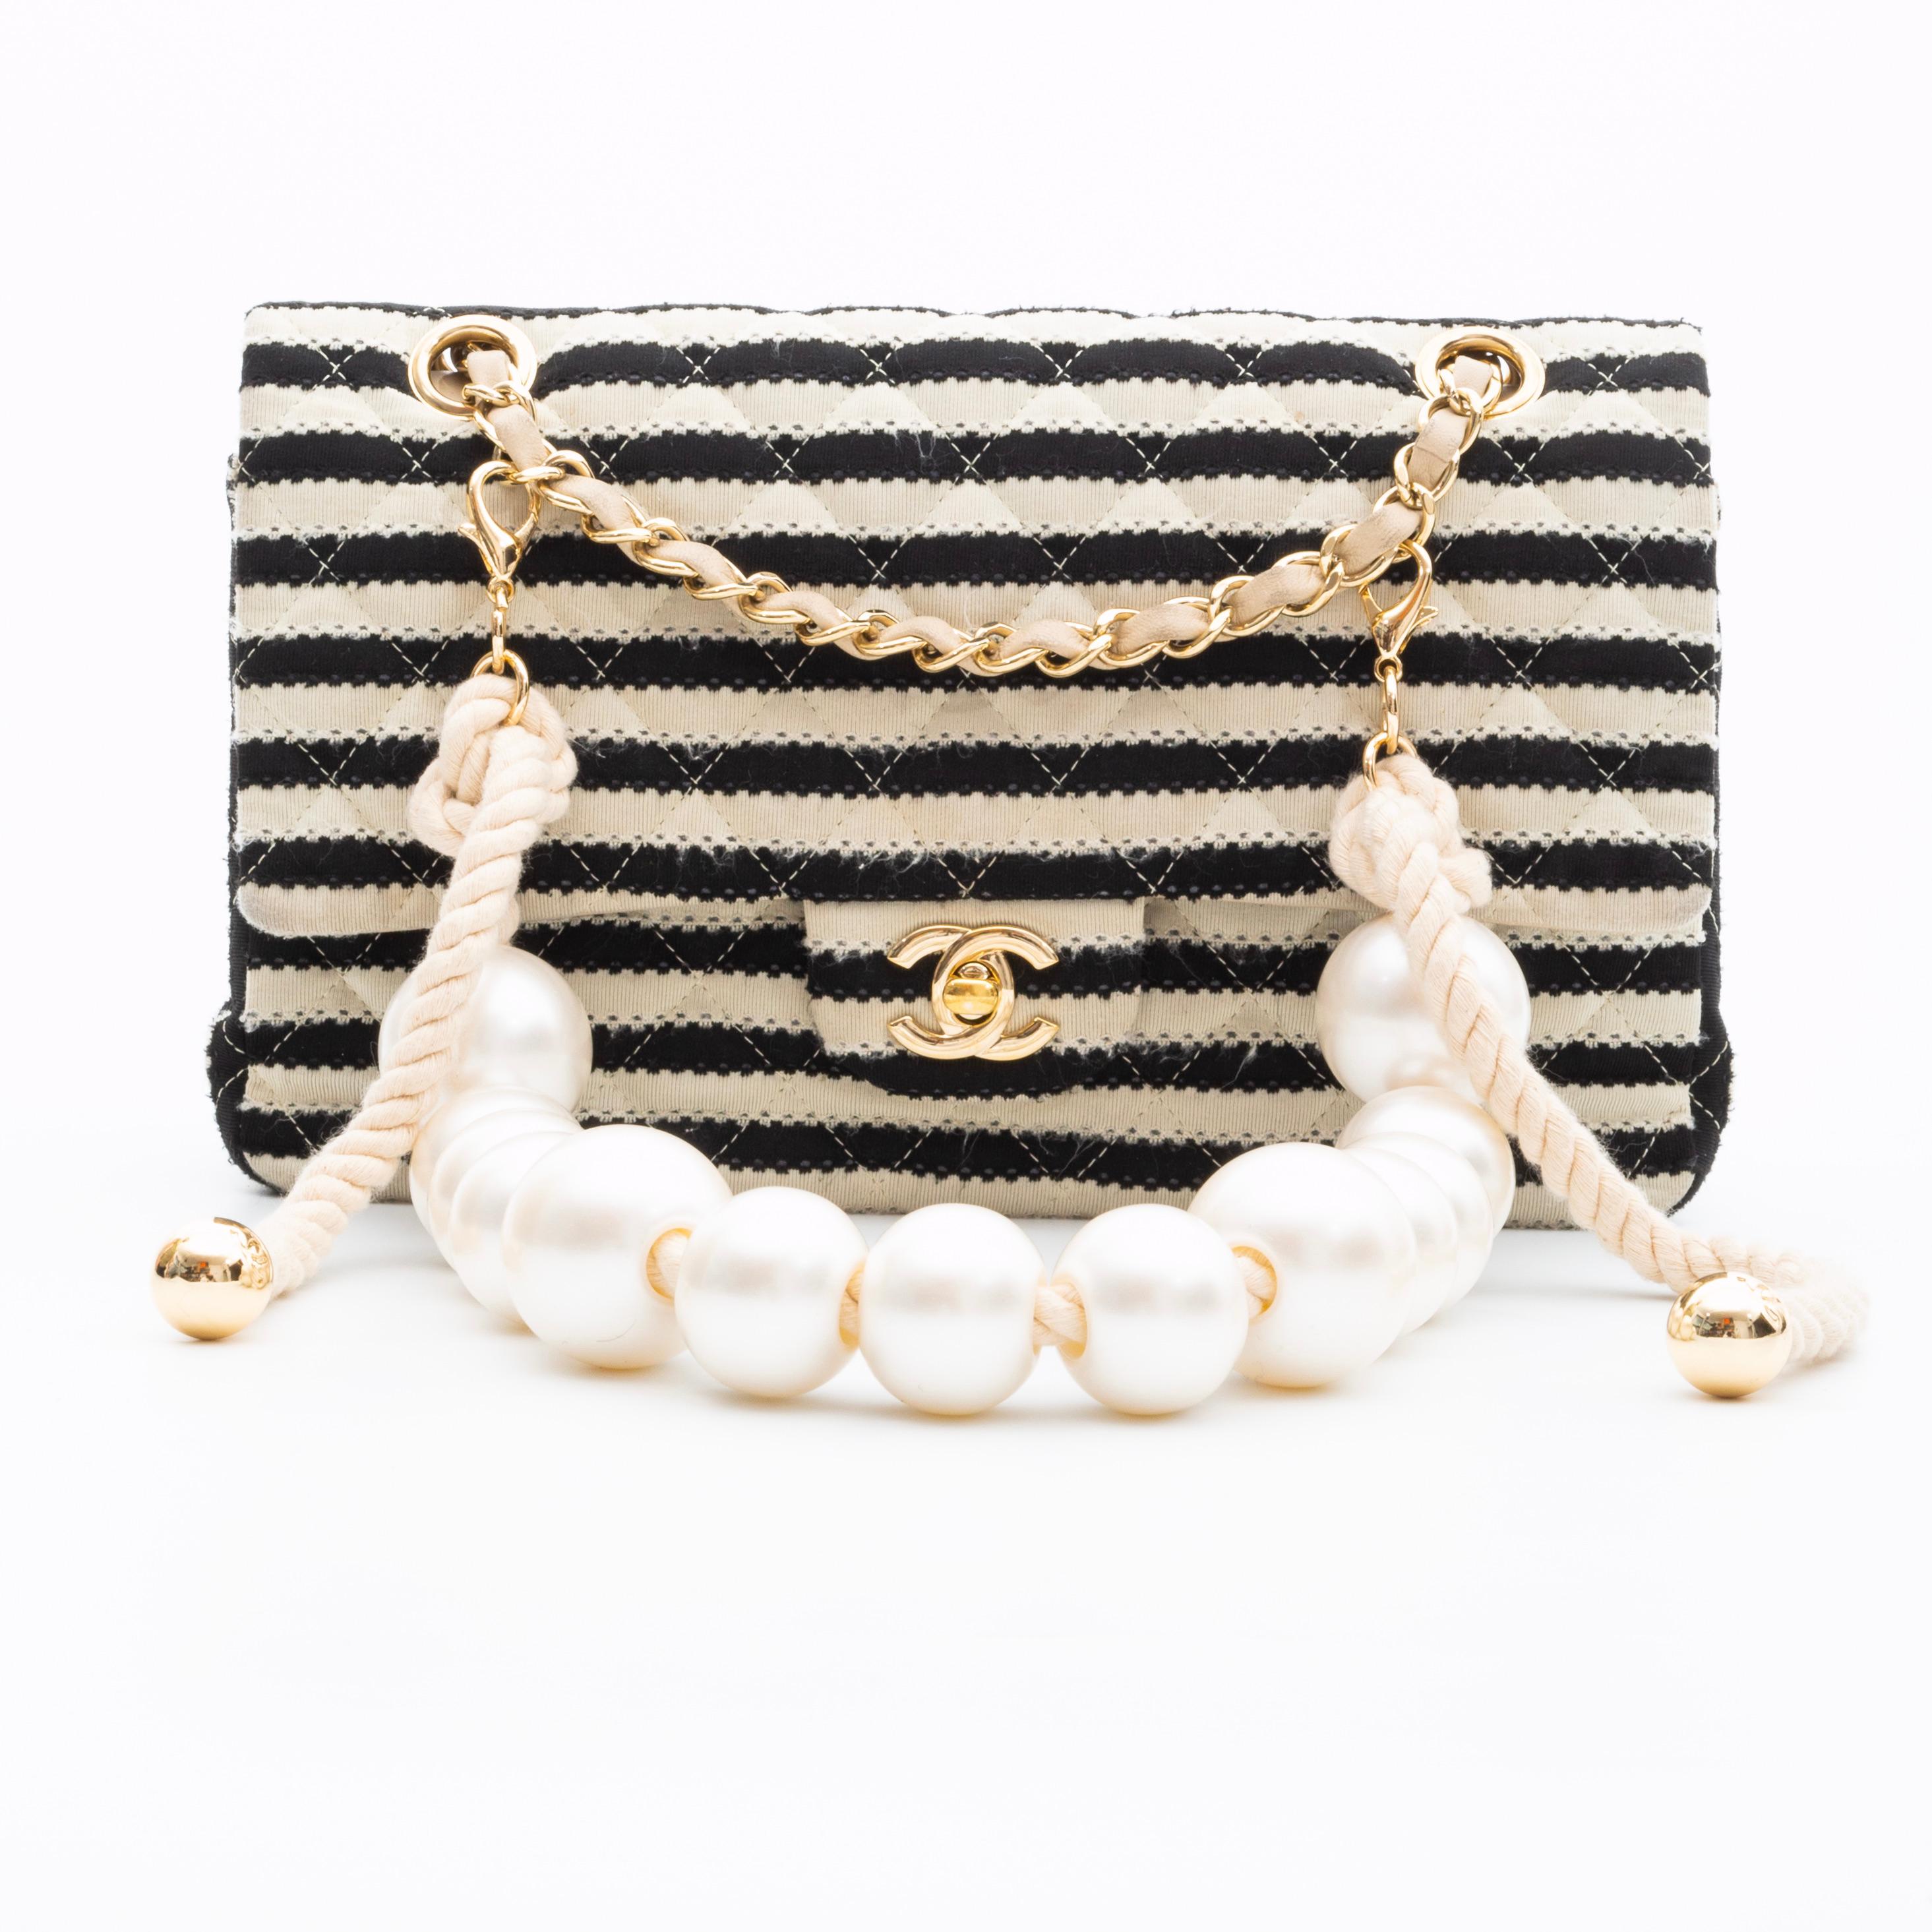 Note the strap was removed from another bag called Chanel By The Sea. Lobster clasp closure was added to be clipped on a bag.

COLOR/MATERIAL: Gold metal and faux pearl white
MEASURES: H 6.25” x L 10”
COMES WITH: Dust bag
CONDITION: Excellent -